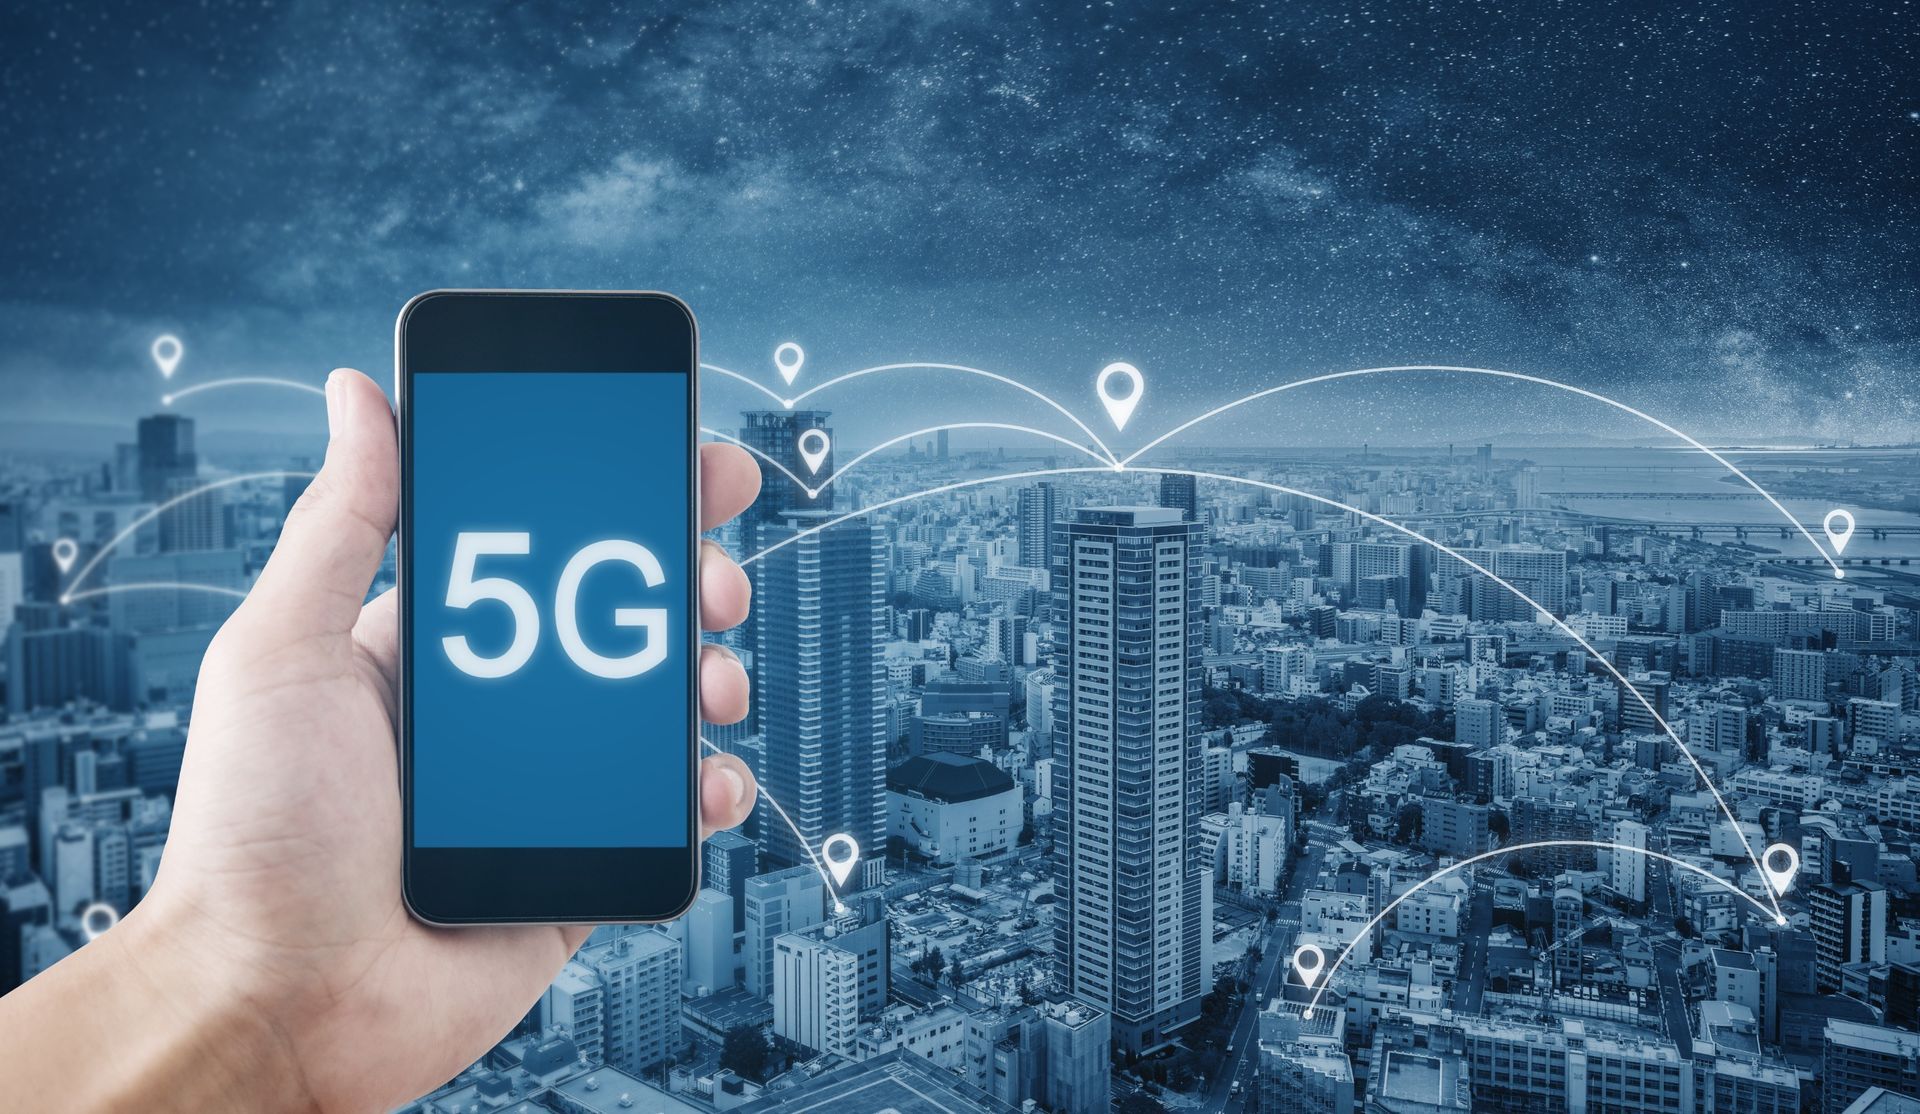 Illustration depicting 5G connectivity symbolizing the revolution in communication services with fas